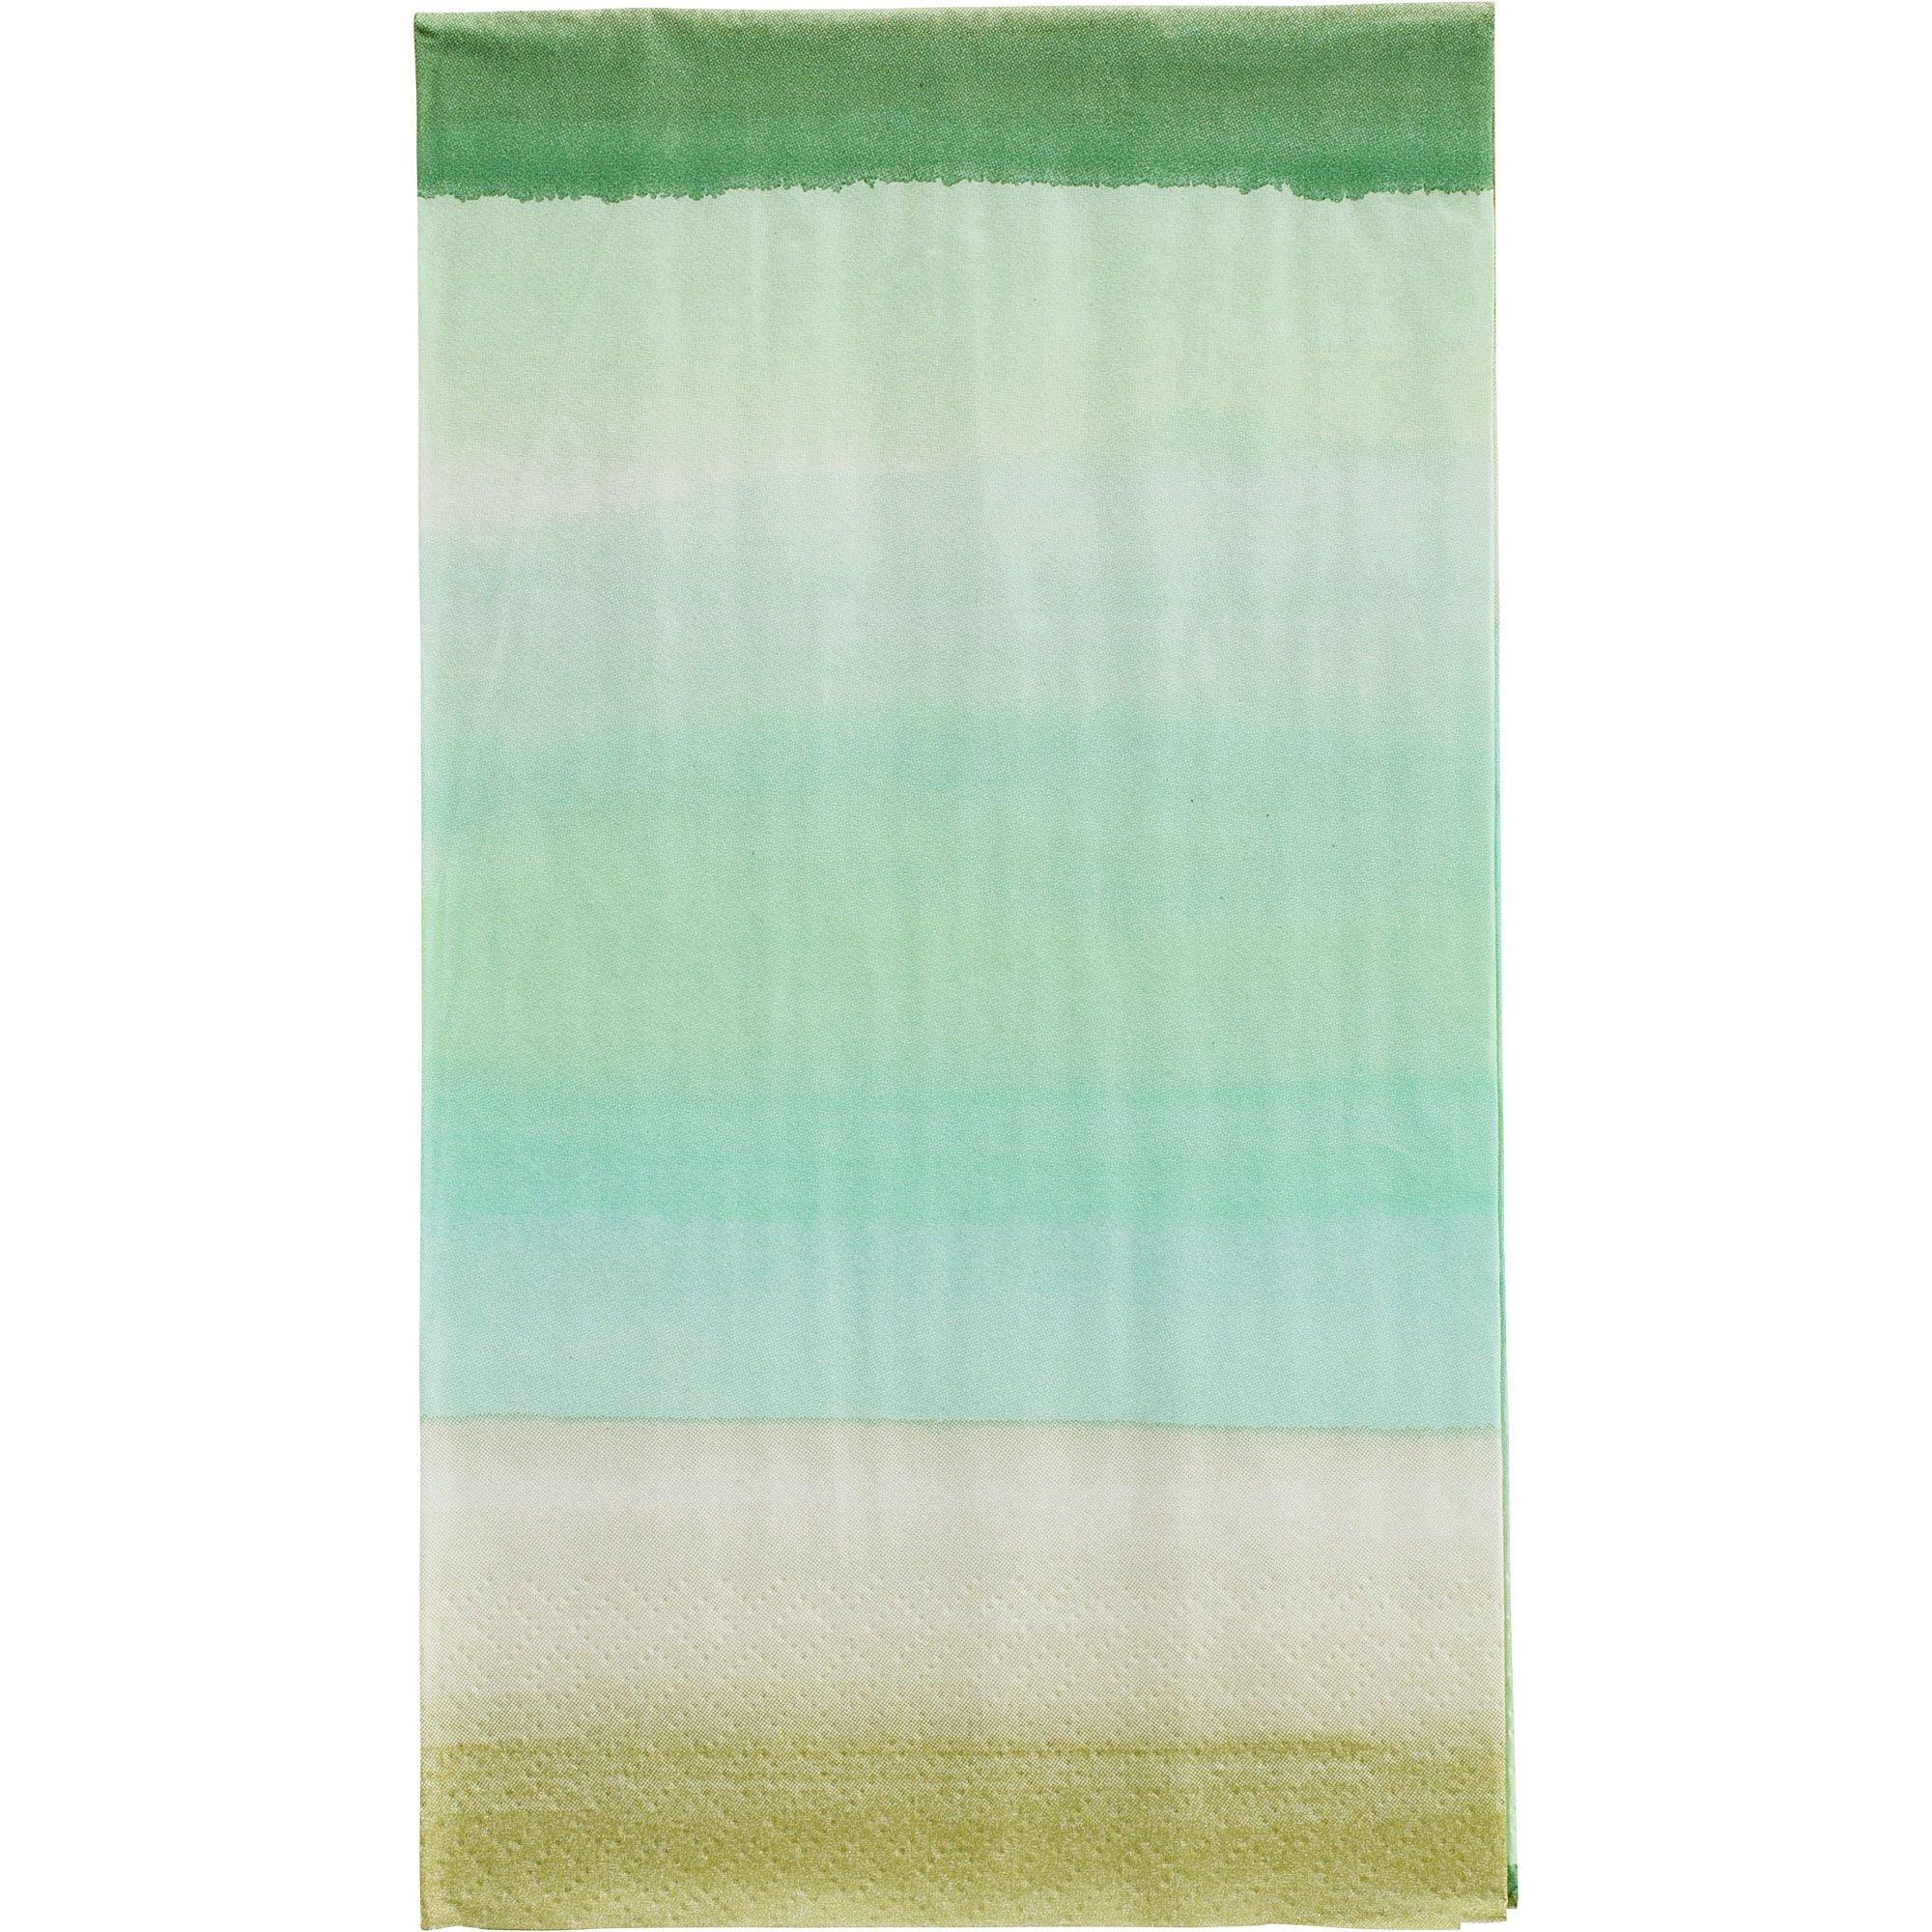 Beach Glass Guest Towels 16ct | Party City